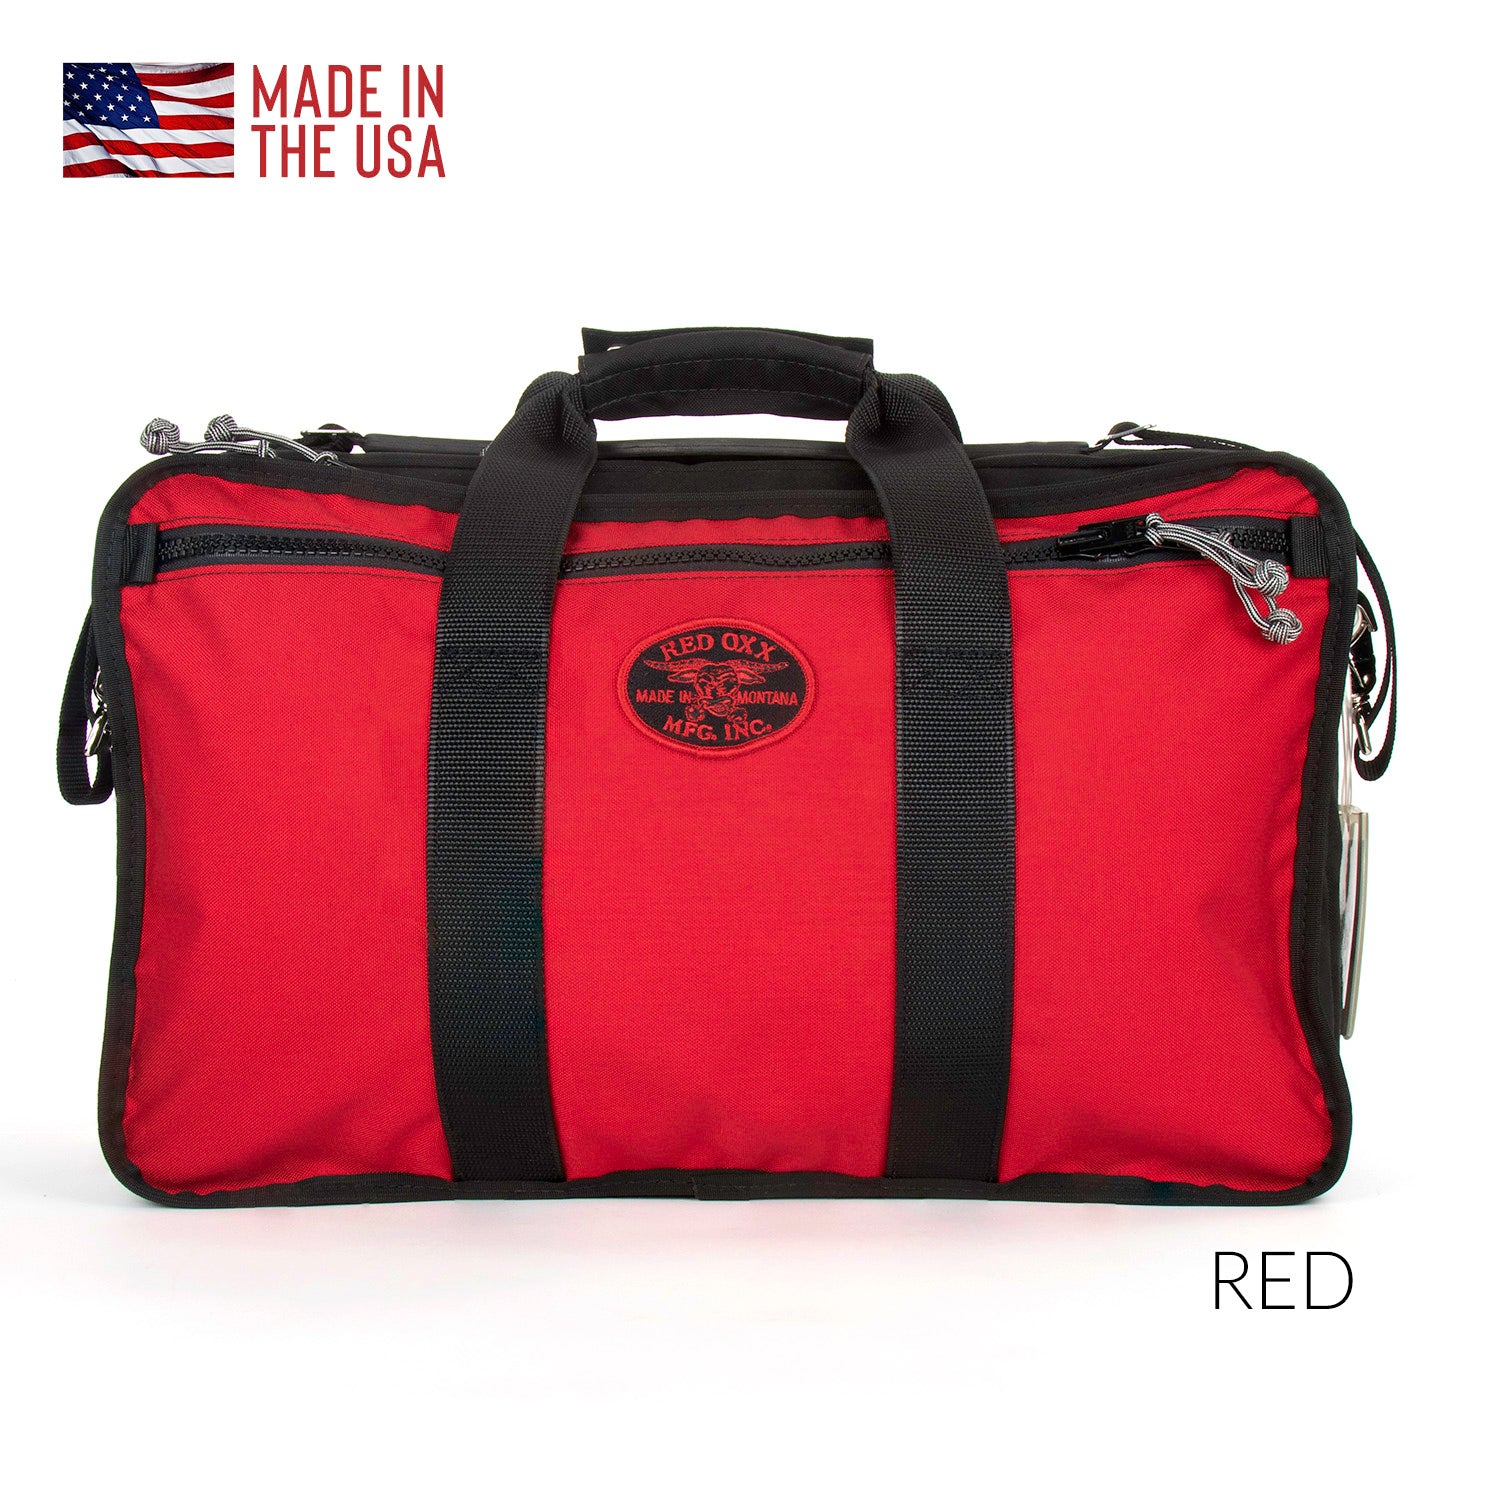 Airboss Carry on Duffel Bag in Red 